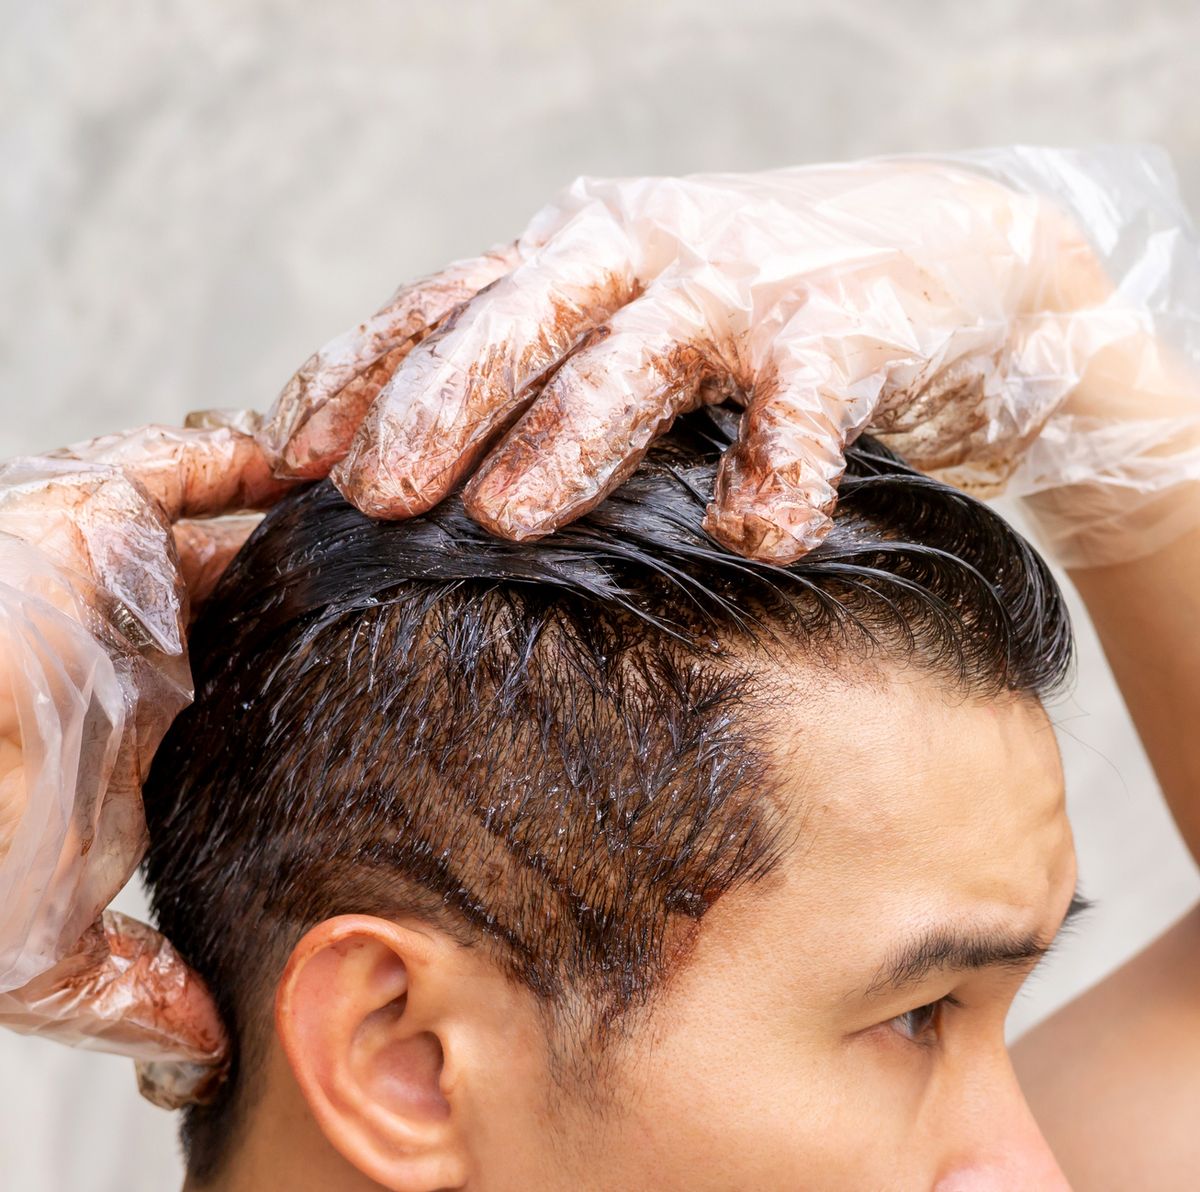 How to Dye Your Hair at Home - Men's Hair Color Tips